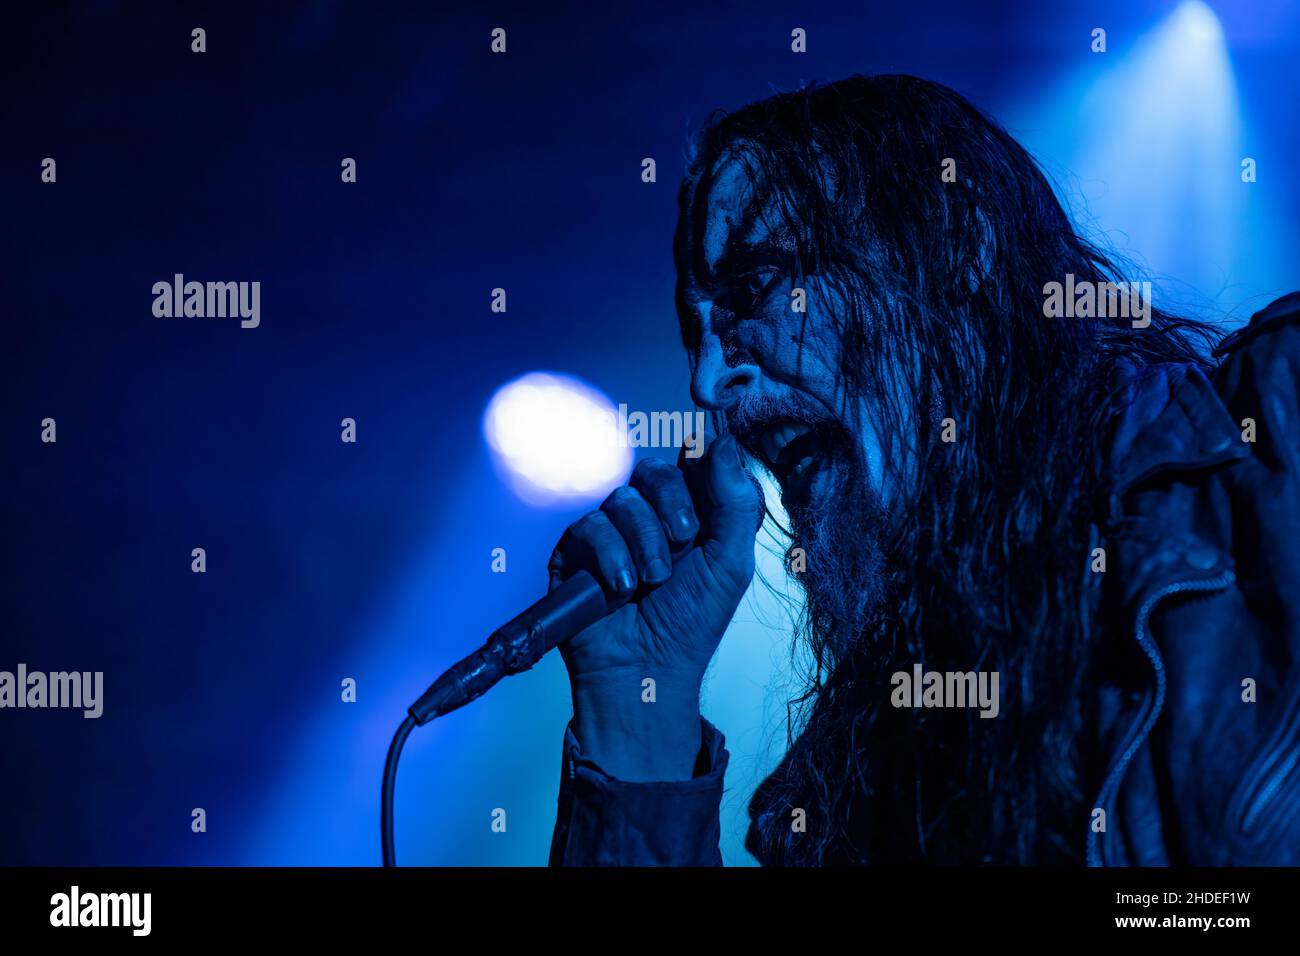 Bergen, Norway. 07th, August 2021.  The Norwegian black metal band Gaahls Wyrd performs a live concert at USF Veftet during Beyond the Gates 2021 in Bergen. Here vocalist Gaahl is seen live on stage. (Photo credit: Gonzales Photo - Jarle H. Moe). Stock Photo